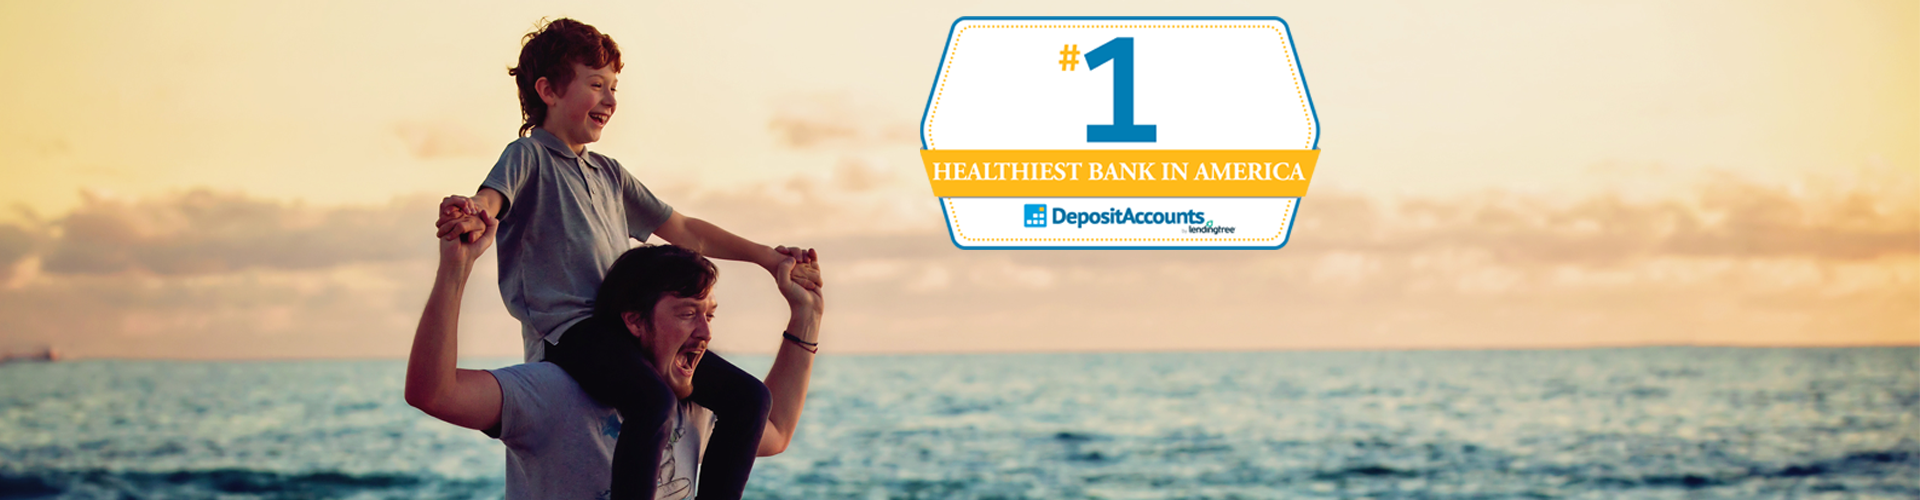 Number One Healthiest Bank in America